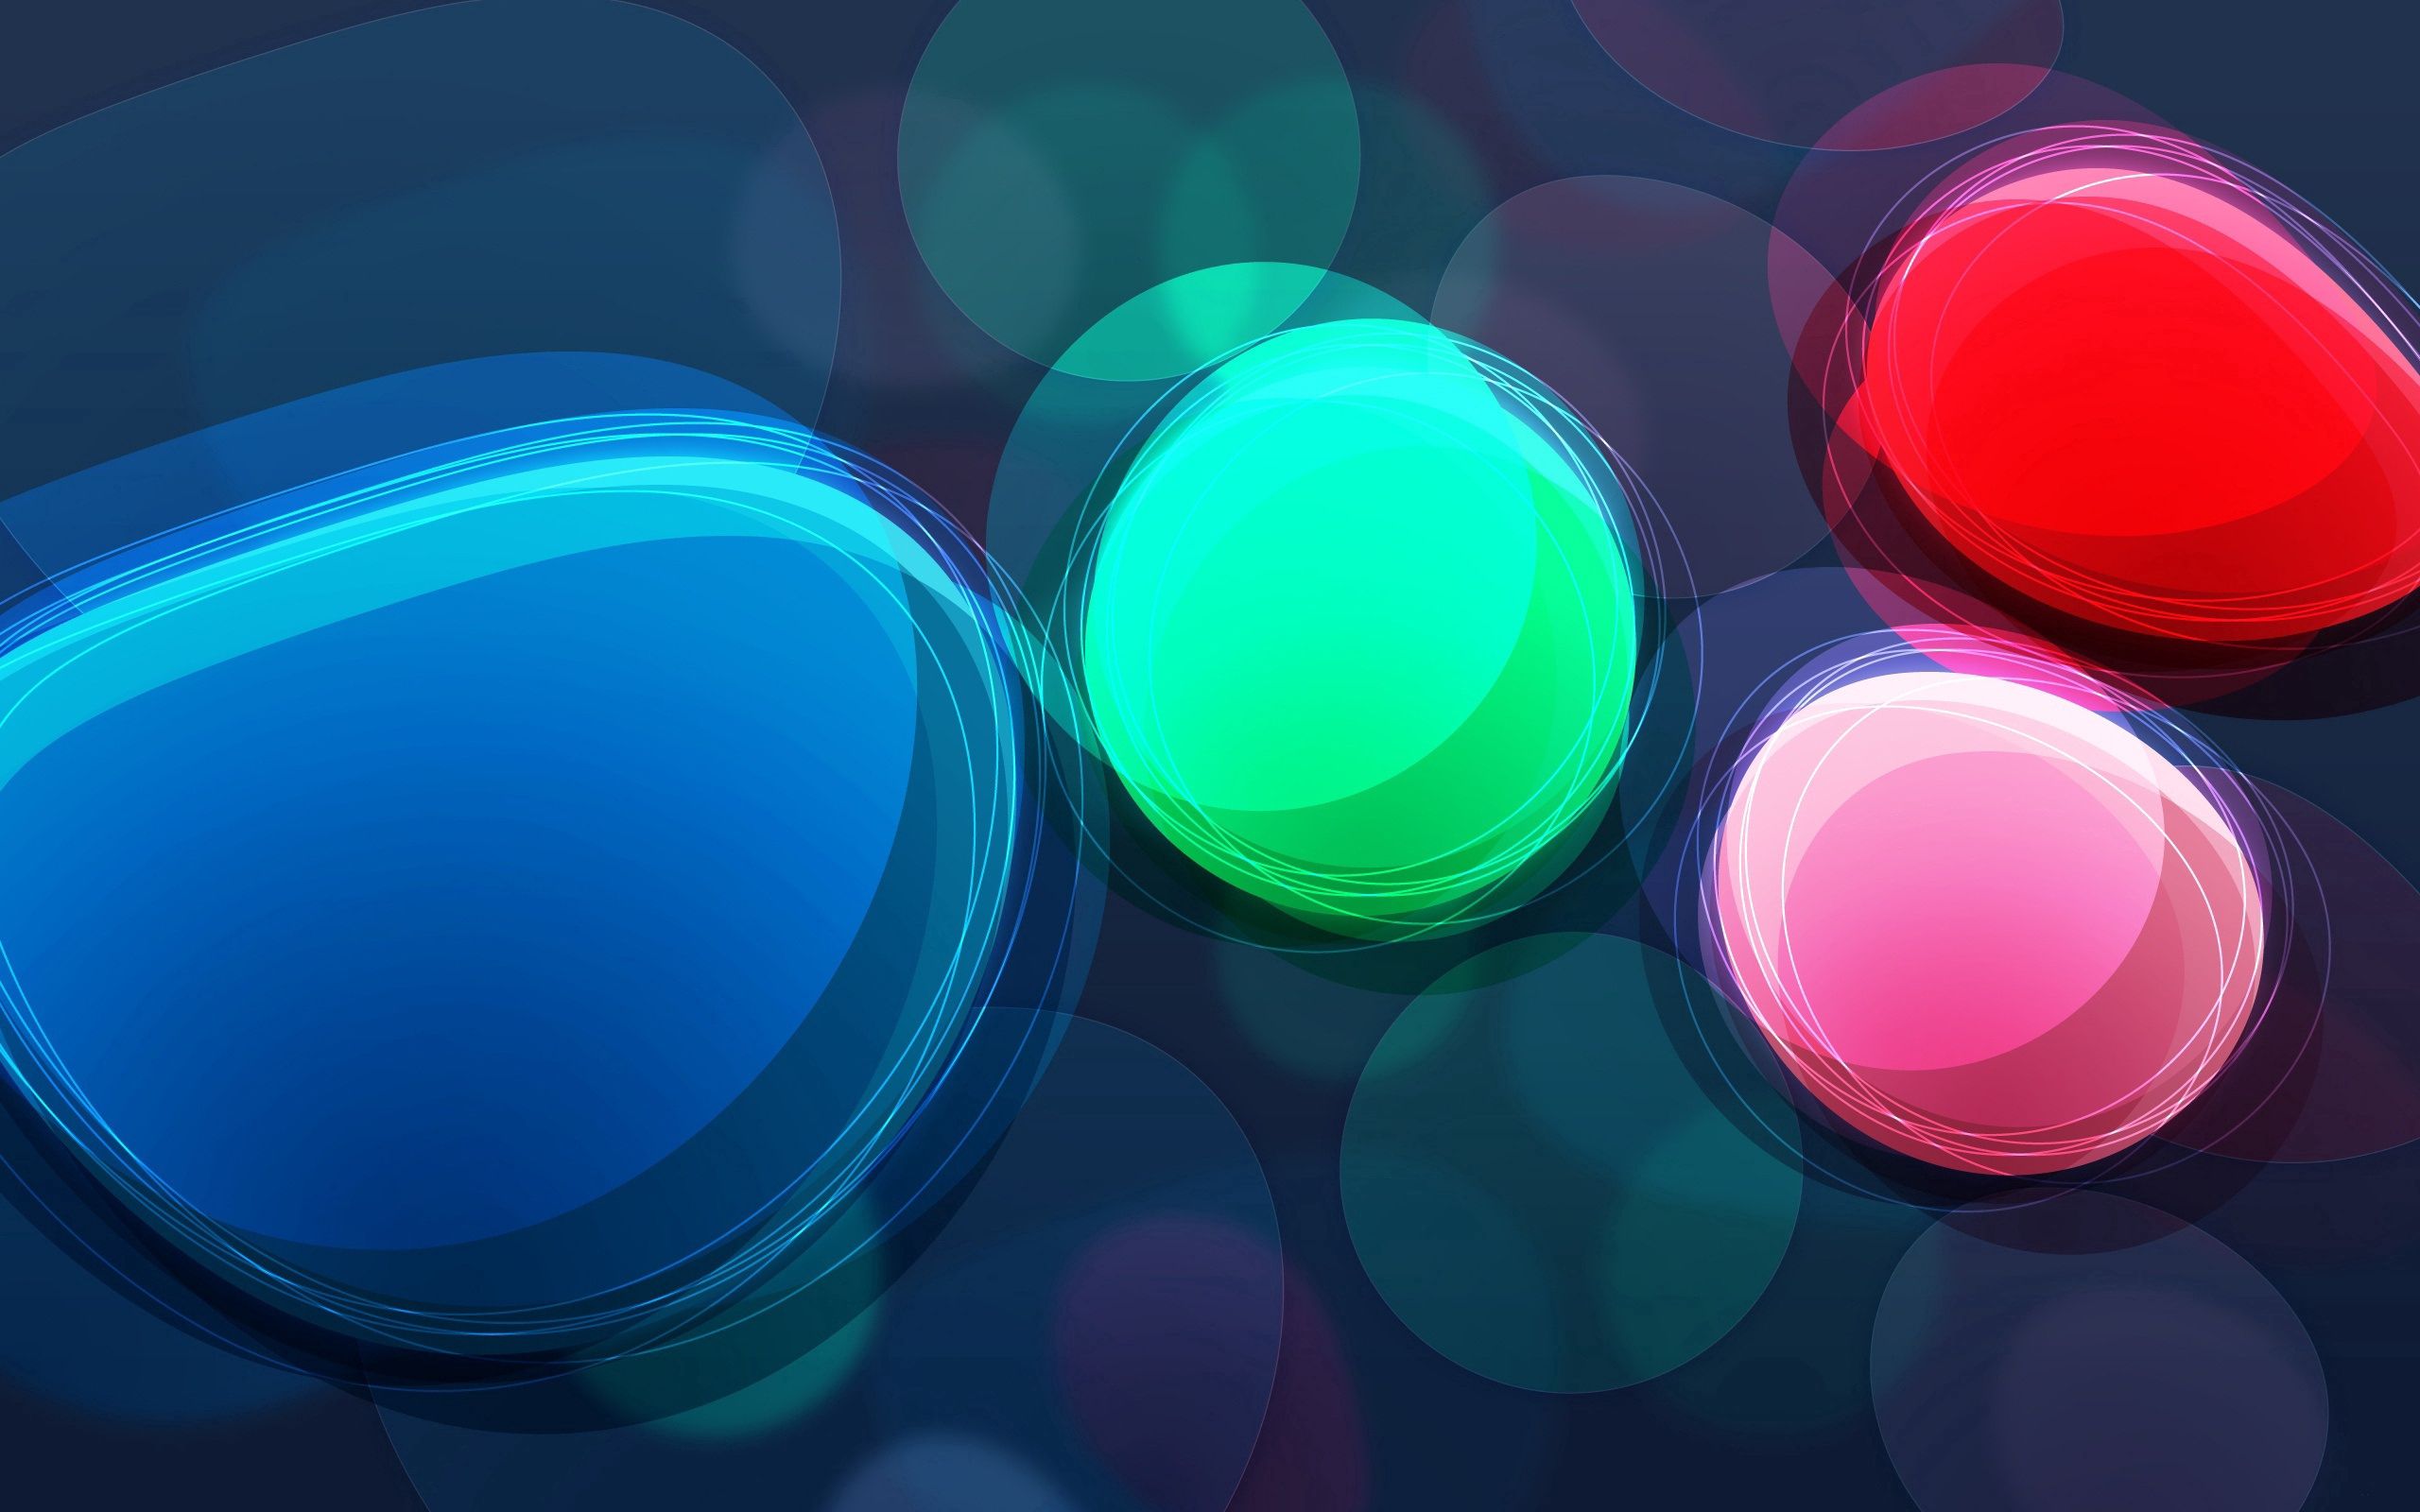 Full HD multicolored, colorful, colourful, abstract, circles, motley